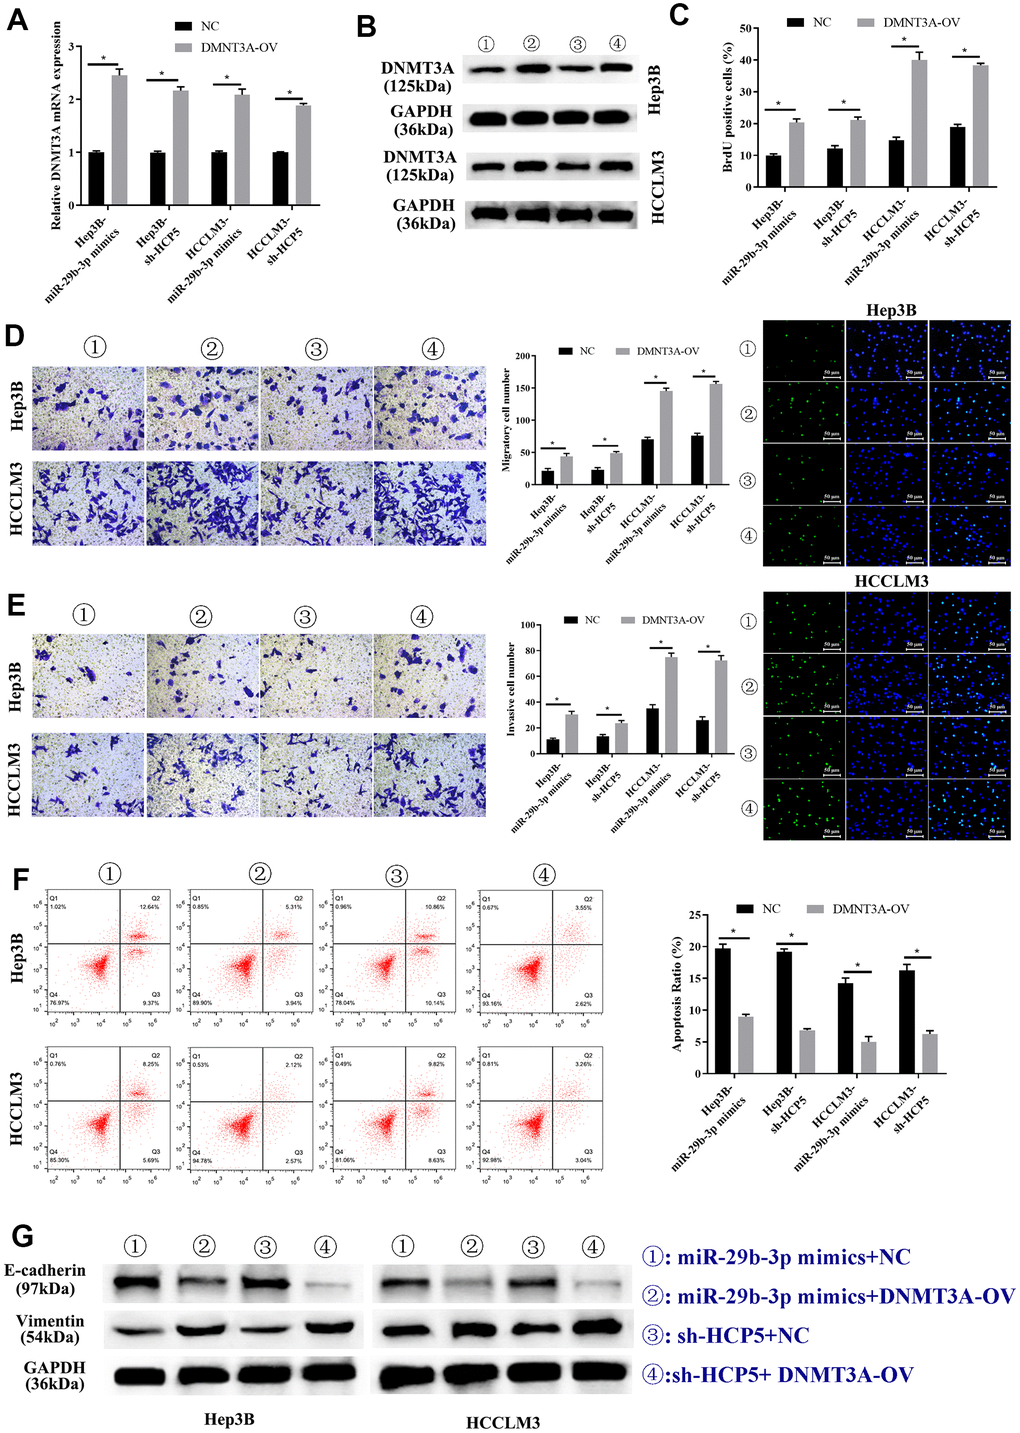 Overexpression of DNMT3A promotes hepatocellular carcinoma cell progression weakened by miR-29b-3p or sh-HCP5. (A) Hep3B and HCCLM3 cells with up-regulation of miR-29b-3p or knockdown of HCP5 and that were transfected with NC or DNMT3A up-regulated plasmid (DNMT3A-OV) were evaluated by qRT-PCR (*pB) The expression of DNMT3A in Hep3B and HCCLM3 cell lines transfected with NC or DNMT3A-OV examined by Western blot analysis for miR-29b-3p overexpression or HCP5 knockdown (*pC) The cell proliferation rate increases when treated with DNMT3A-OV (*pD, E) DNMT3A promotes the cell metastatic and invasive capacity (*pF) DNMT3A promotes cell proliferation through inhibiting cell apoptosis (*pG) DNMT3A promotes epithelial-mesenchymal transition (EMT) progress by increasing E-cadherin and decreasing vimentin.